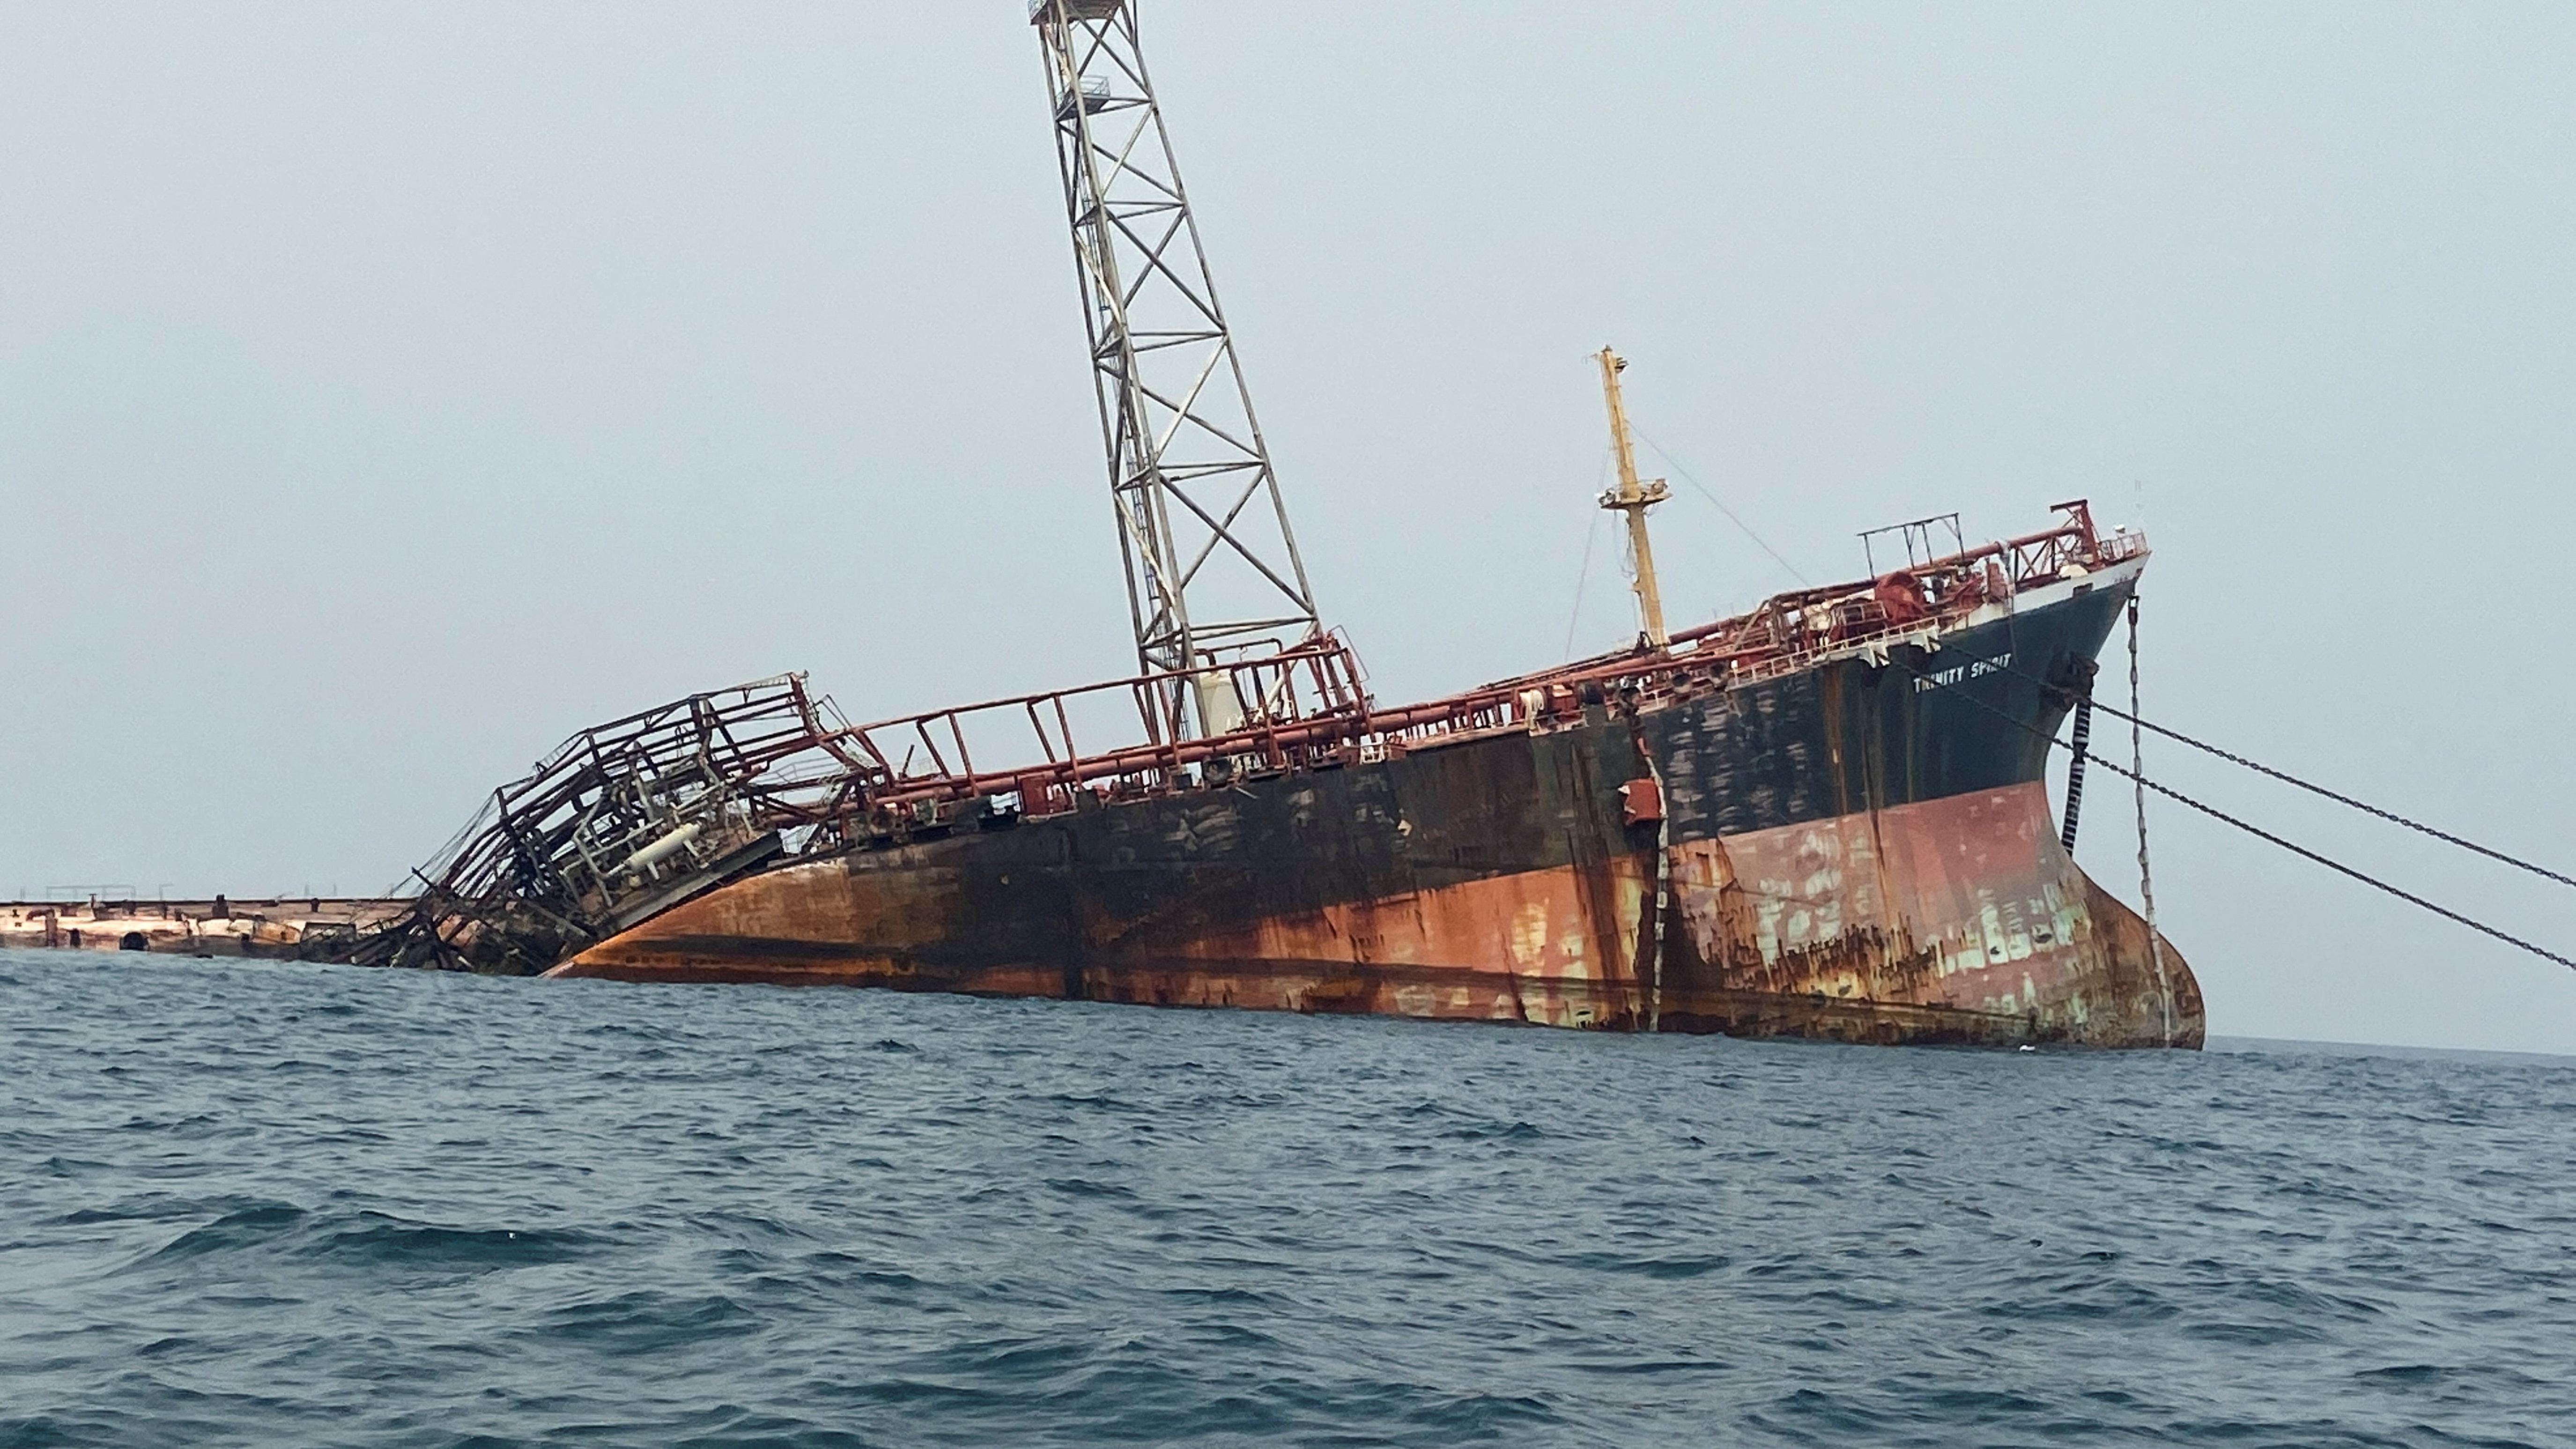 Wreckage of theTrinity Spirit floating production, storage and offloading (FPSO) vessel is seen after an explosion and fire broke out at Shebah Exploration & Production Company Ltd (SEPCOL) offshore production site on Wednesday, in Warri, Nigeria February 4, 2022. REUTERS/Tife Owolabi